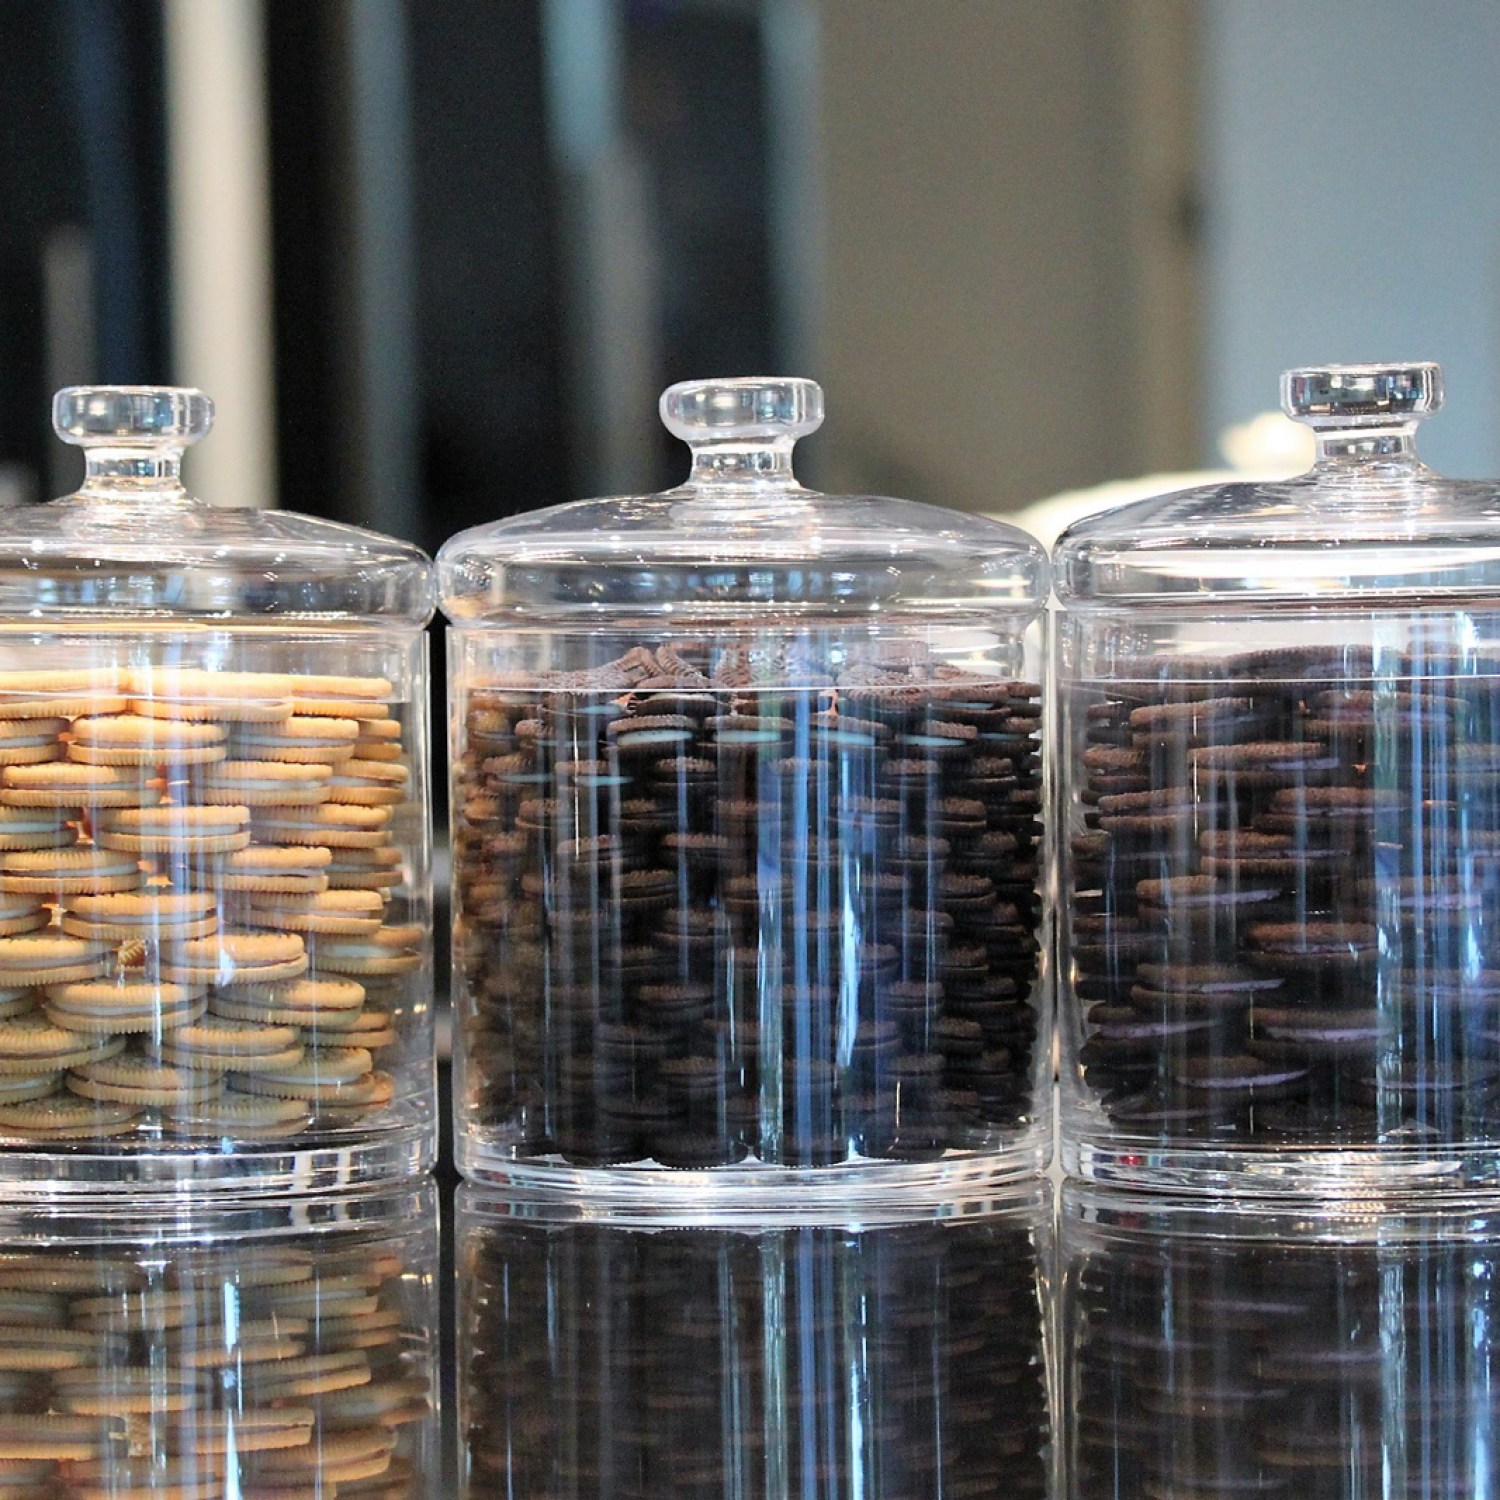 Three clear glass canisters filled with sandwich cookies